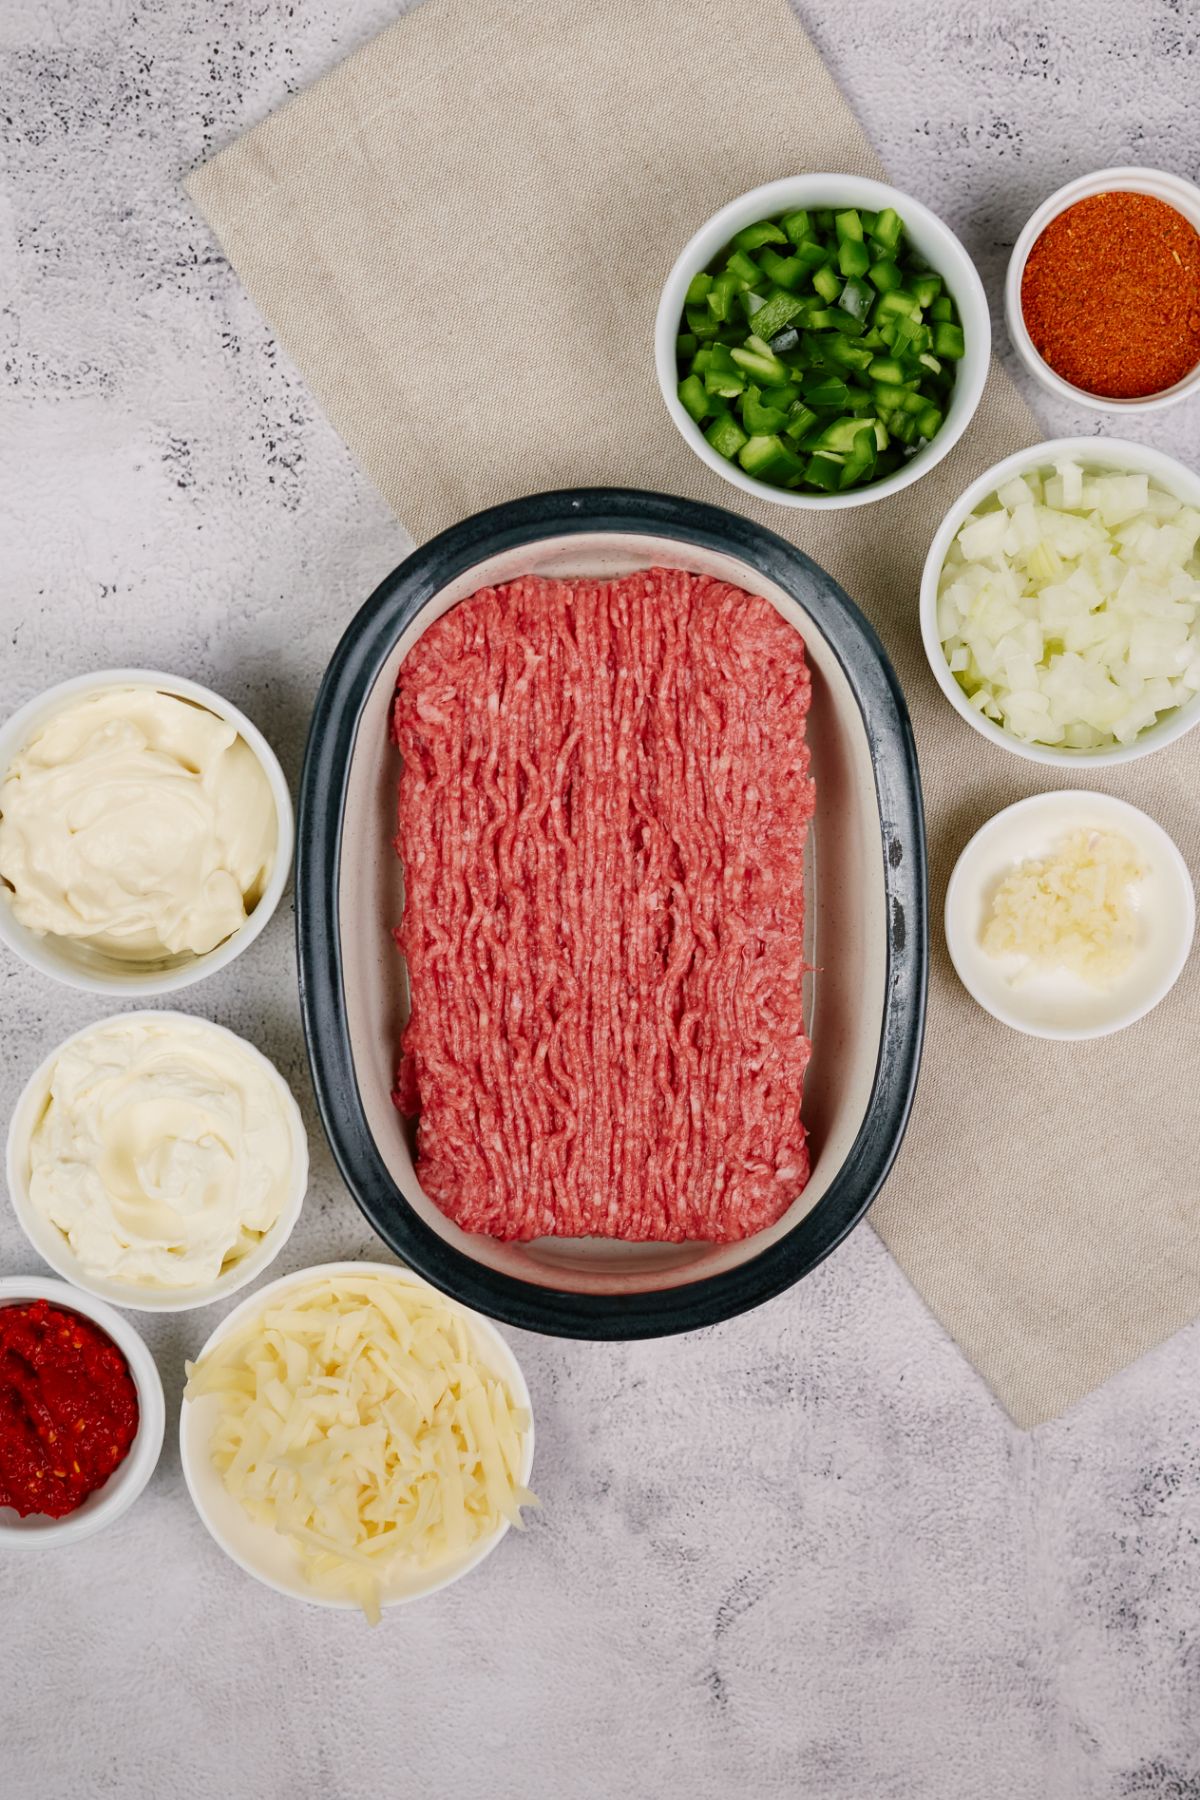 raw ground beef in large bowl next to bowls of cheese and vegetables on gray table